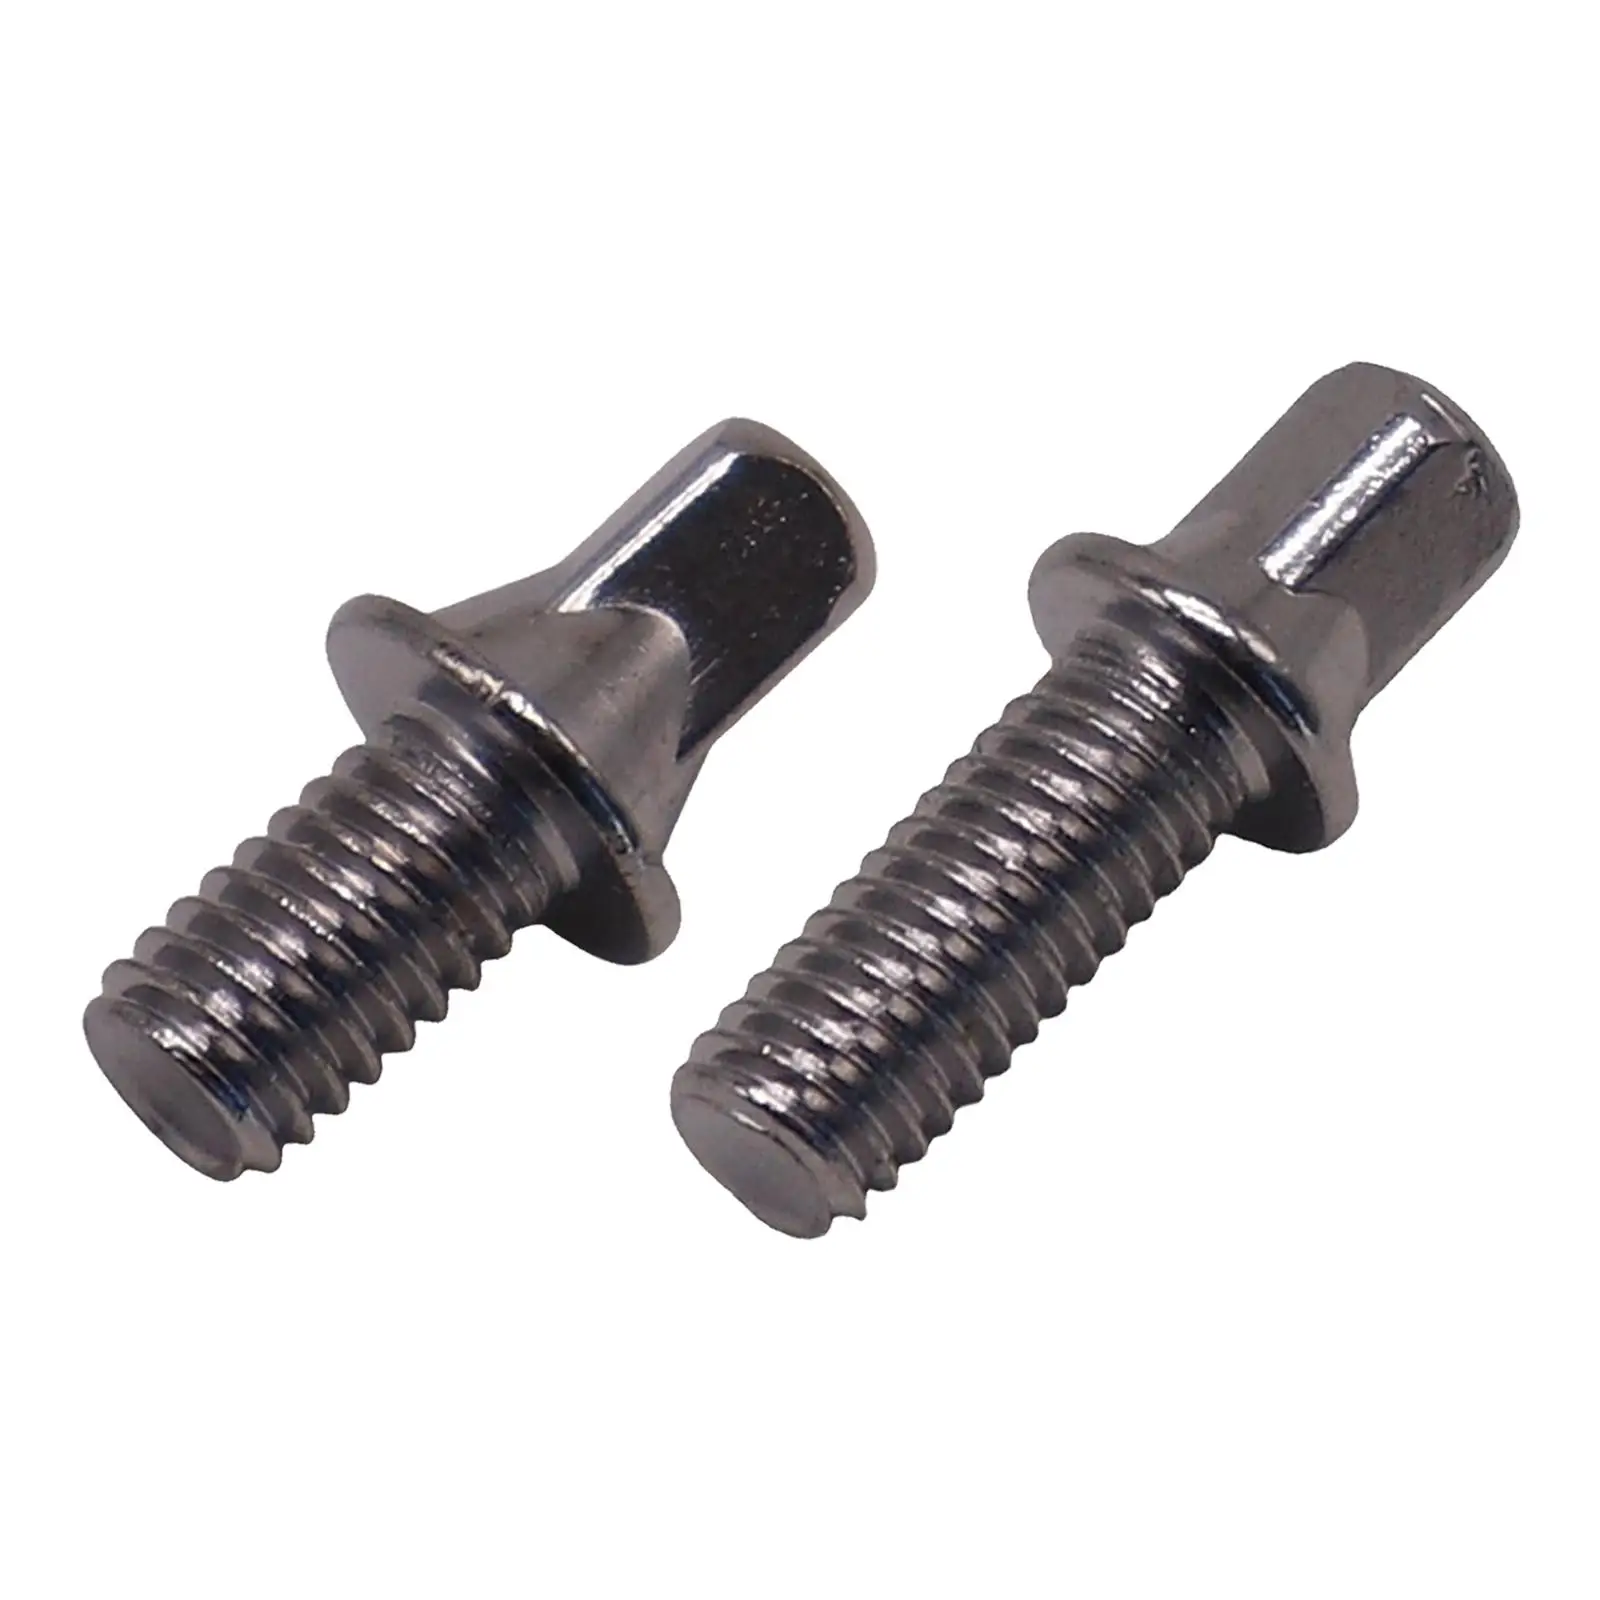 

10x Drum Tension Rods Metal Rustproof Short Screws Tight Screw for Snare Drum Percussion Instrument Accessory Replaces Part